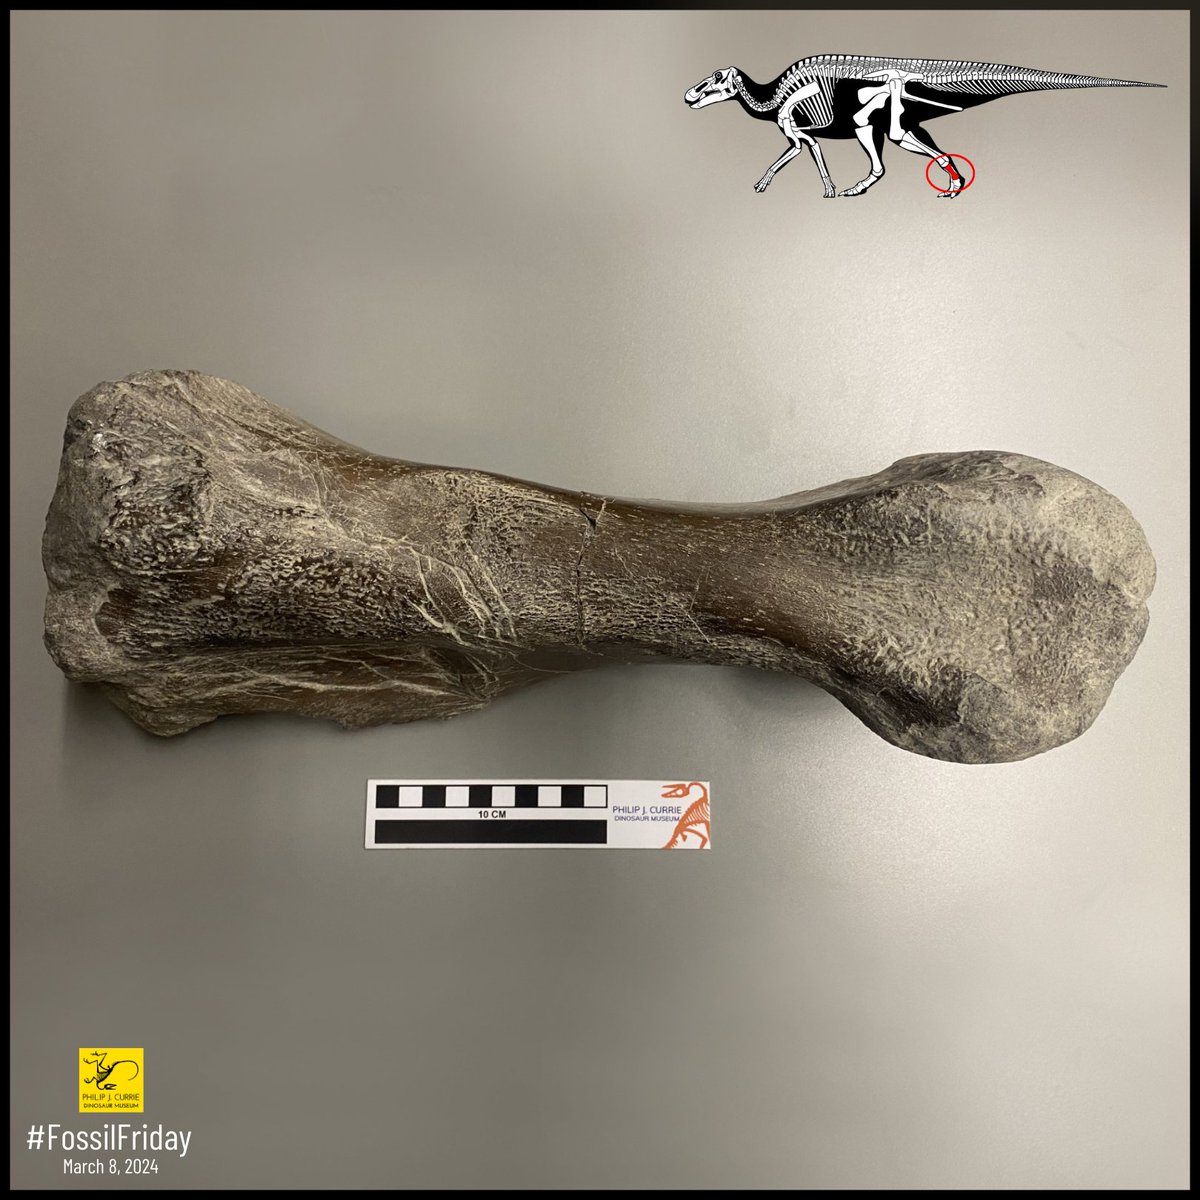 #FossilFriday! This foot bone is a metatarsal, the bone between your ankle and toes. Found in 2023, this hadrosaur bone is likely from an Edmontosaurus, as no other dinosaurs from the Grande Prairie area 75 m.y.a. reached this size. Prepared: Cindy Wendorf. Diagram: Scott Harmon.